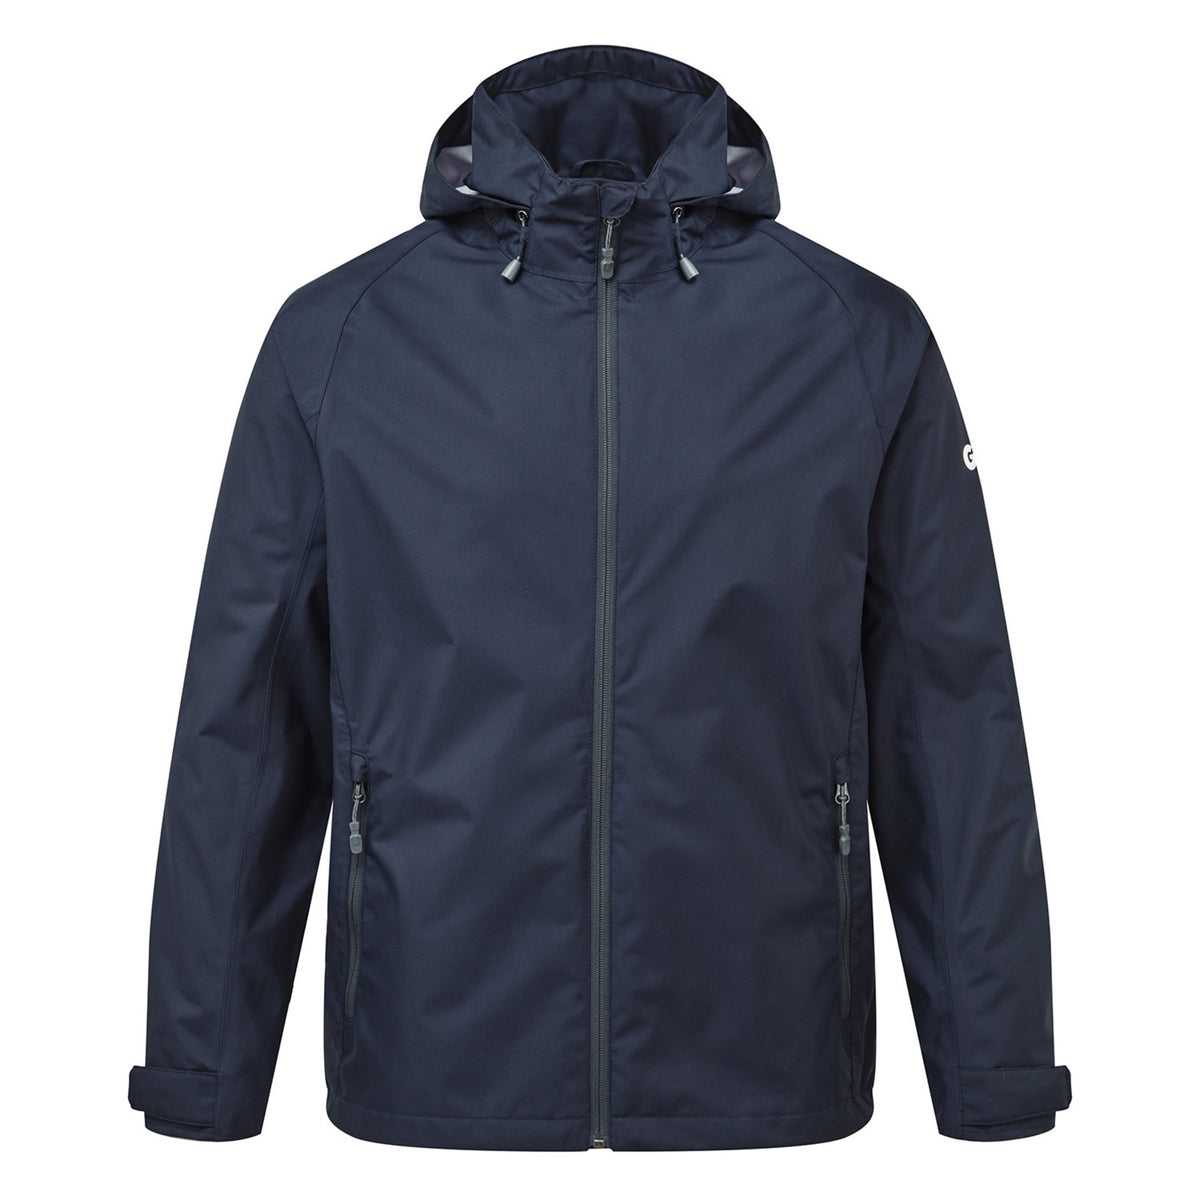 GILL Men's Hooded Lite Jacket from GILL - CHAOS Fishing